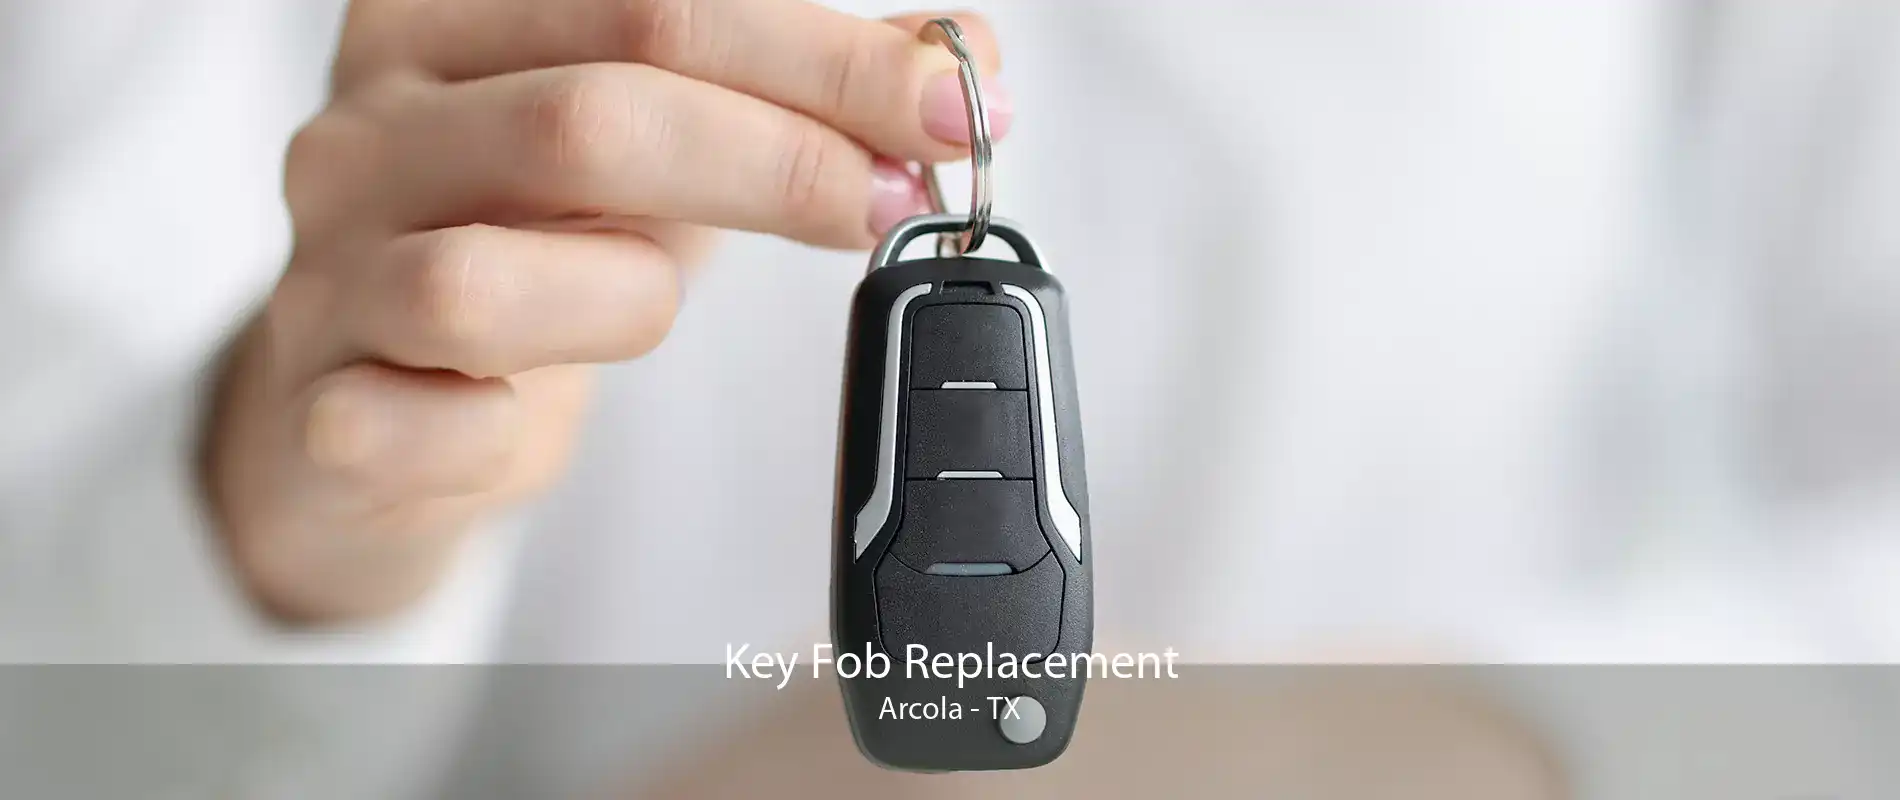 Key Fob Replacement Arcola - TX